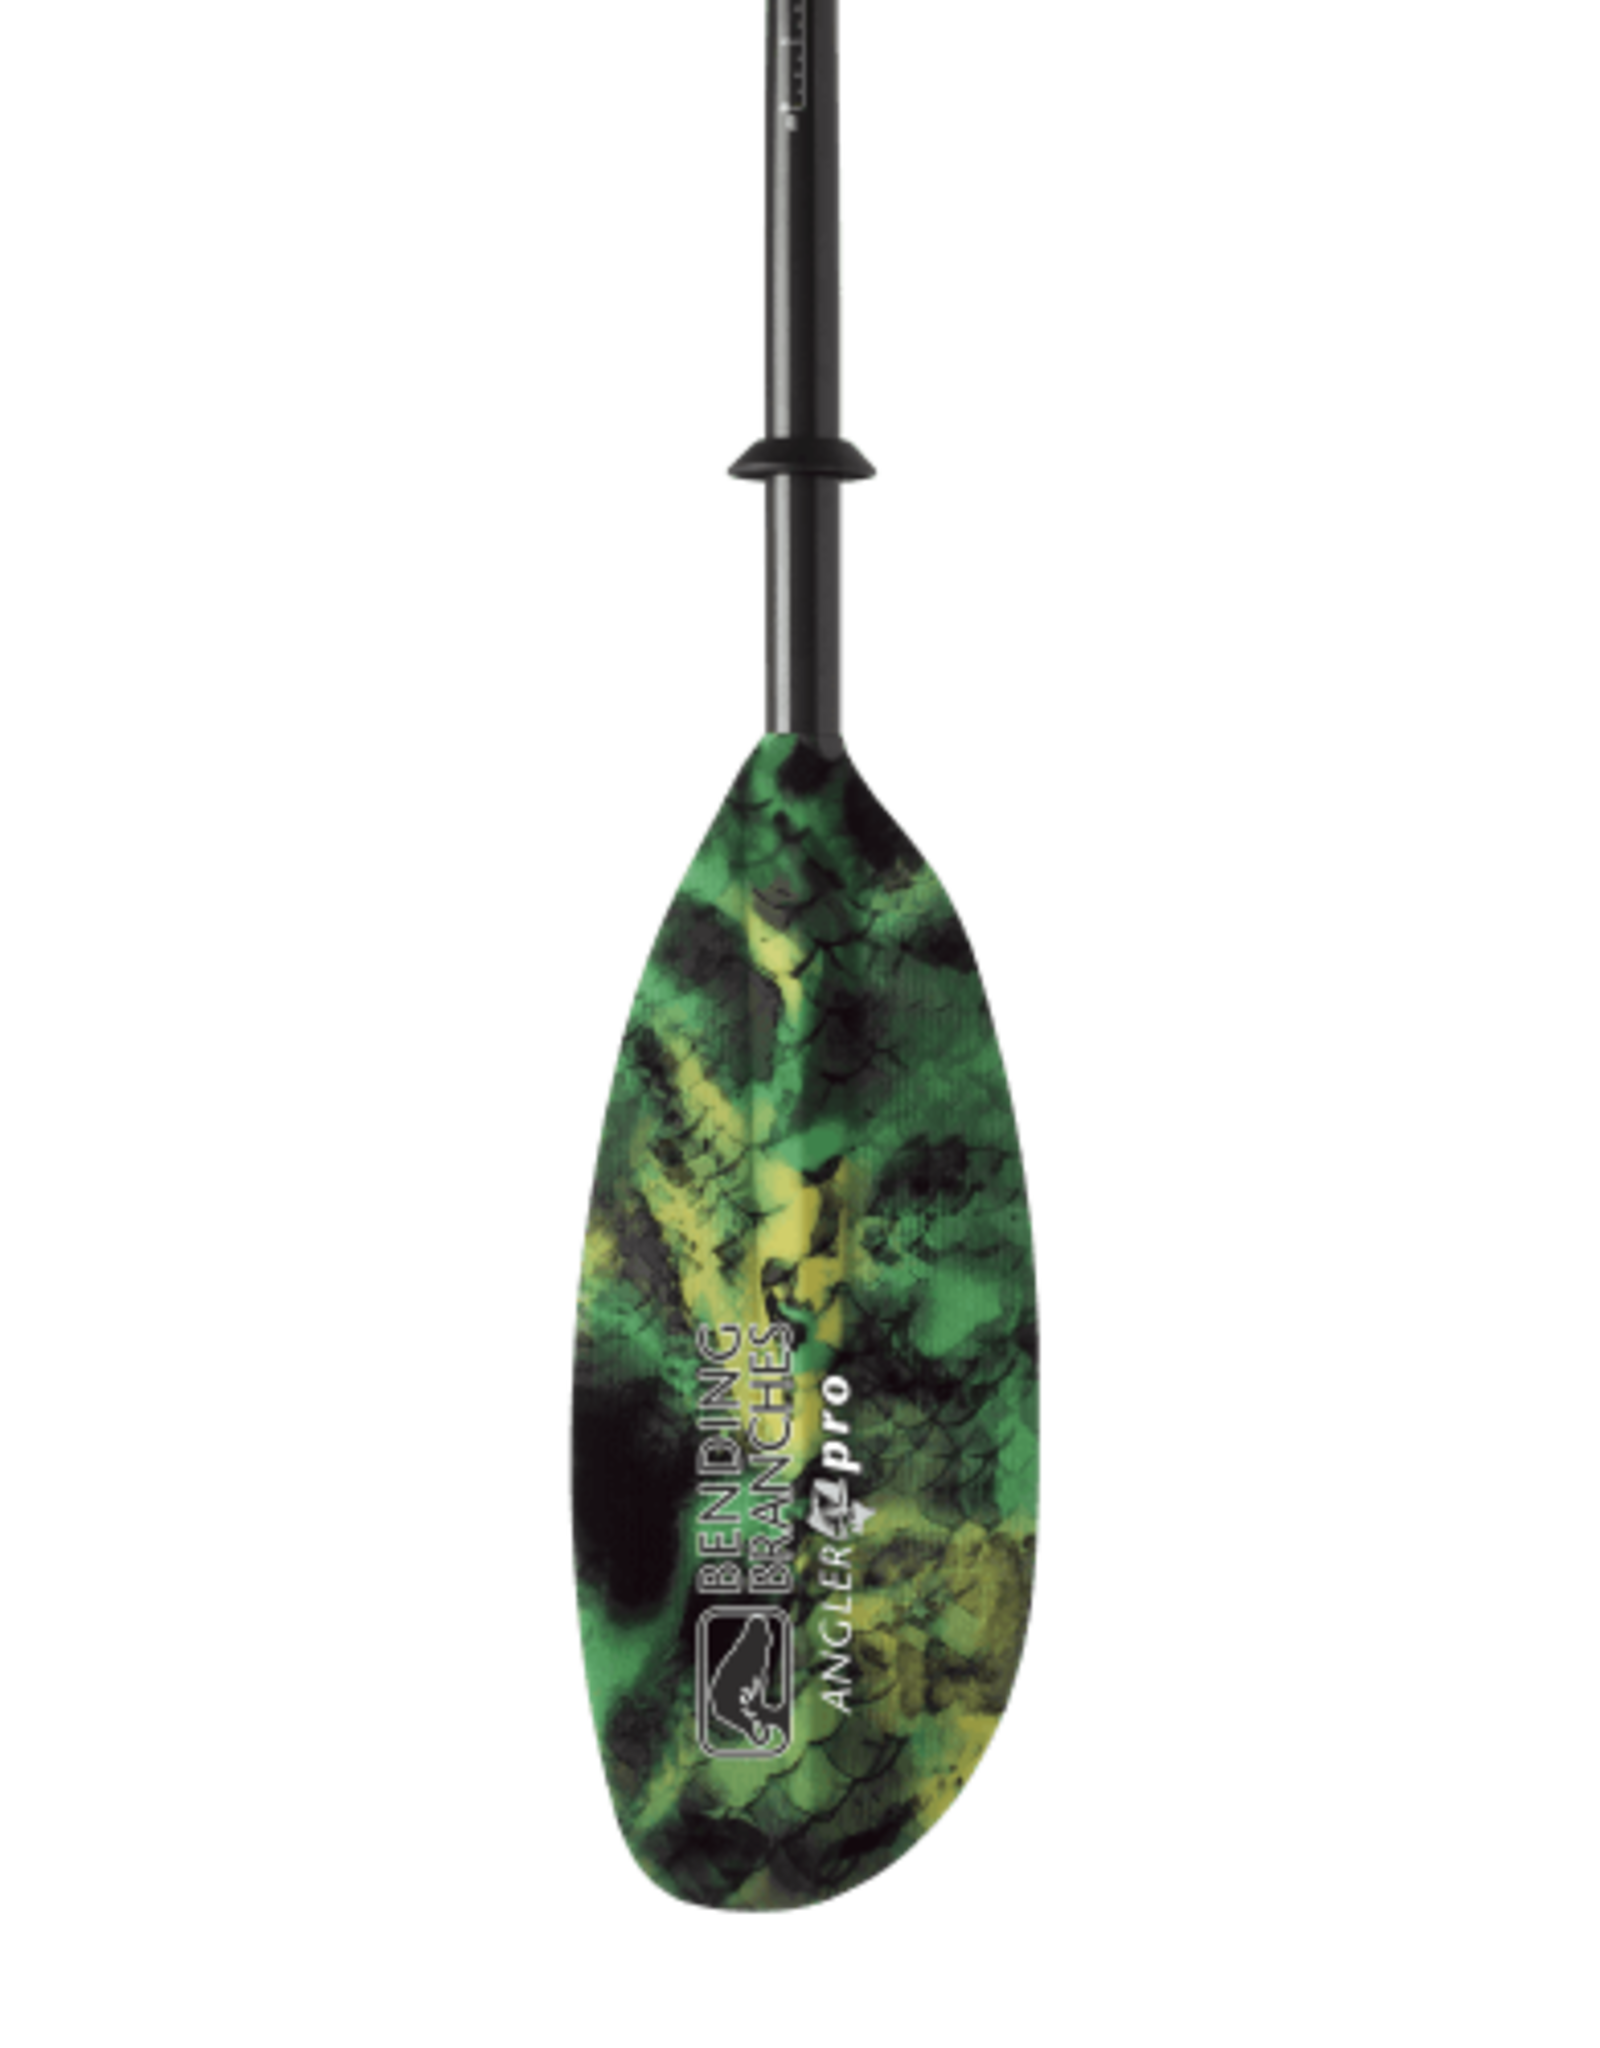 Bending Branches Bending Branches paddle Angler Pro